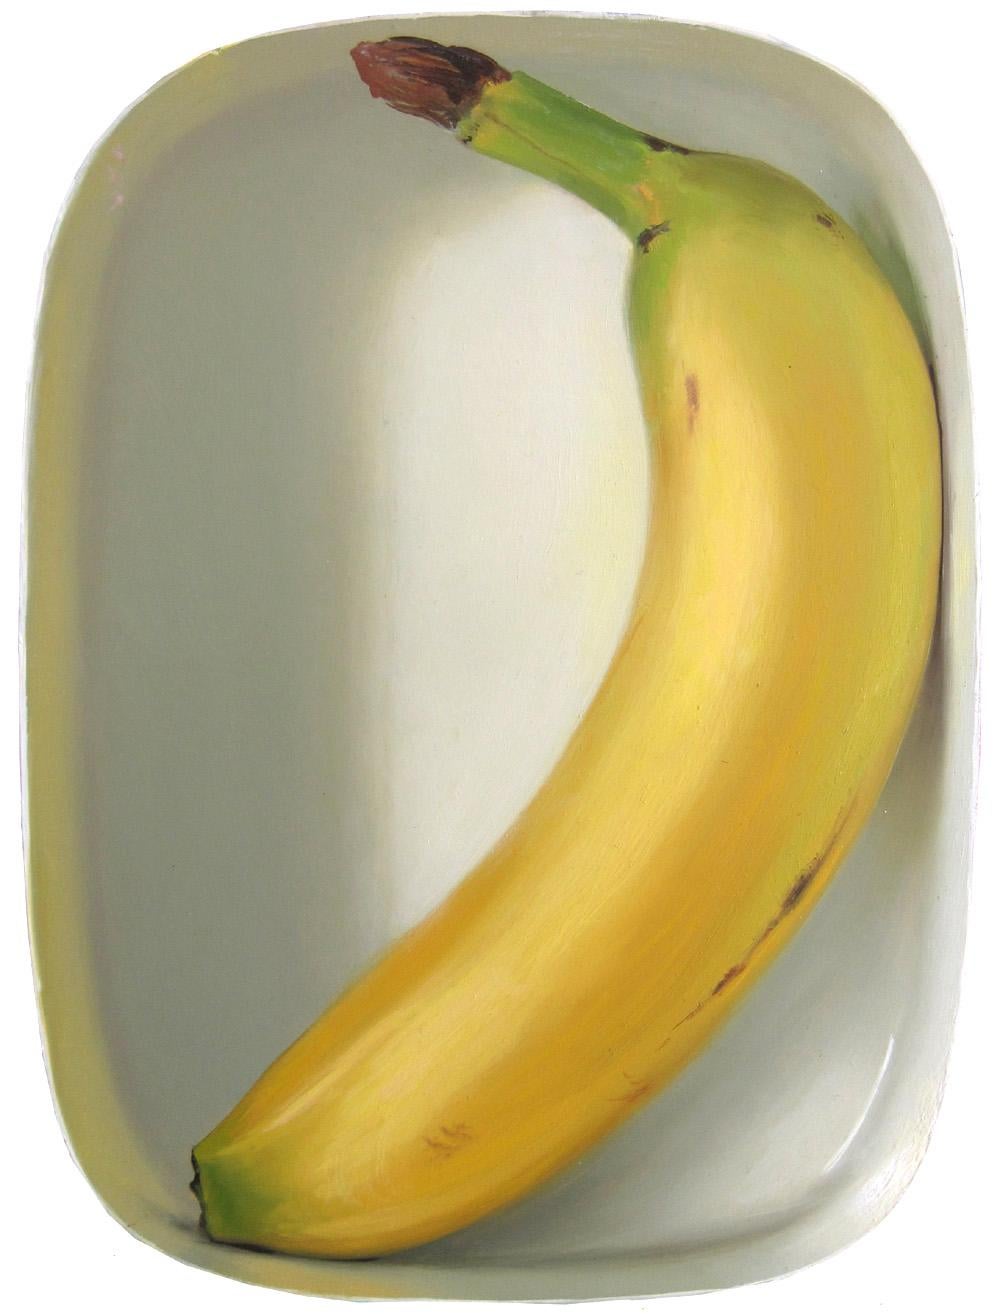 Rutger Hiemstra Figurative Painting - Banana in lunchbox- 21st Century Contemporary Still-life Painting of a banana